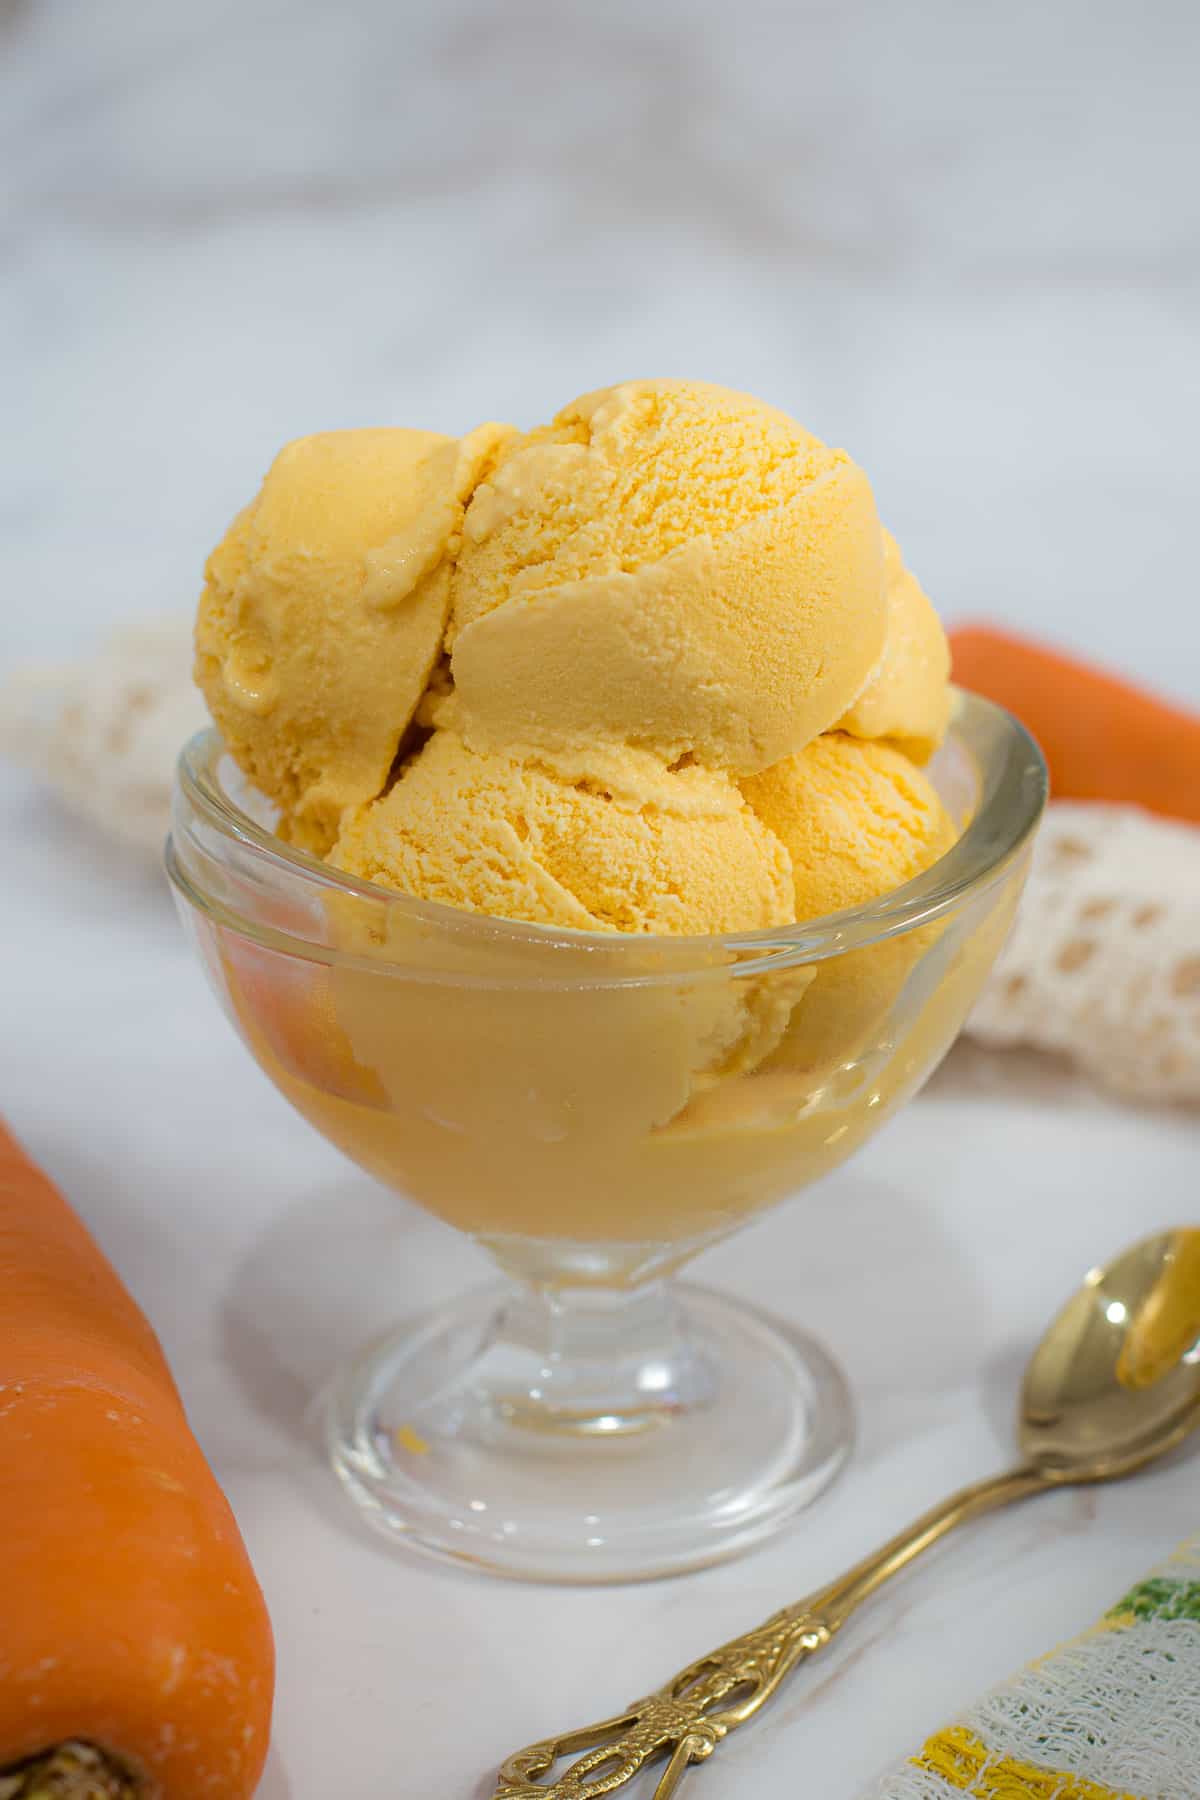 Scoops of carrot ice in a bowl.